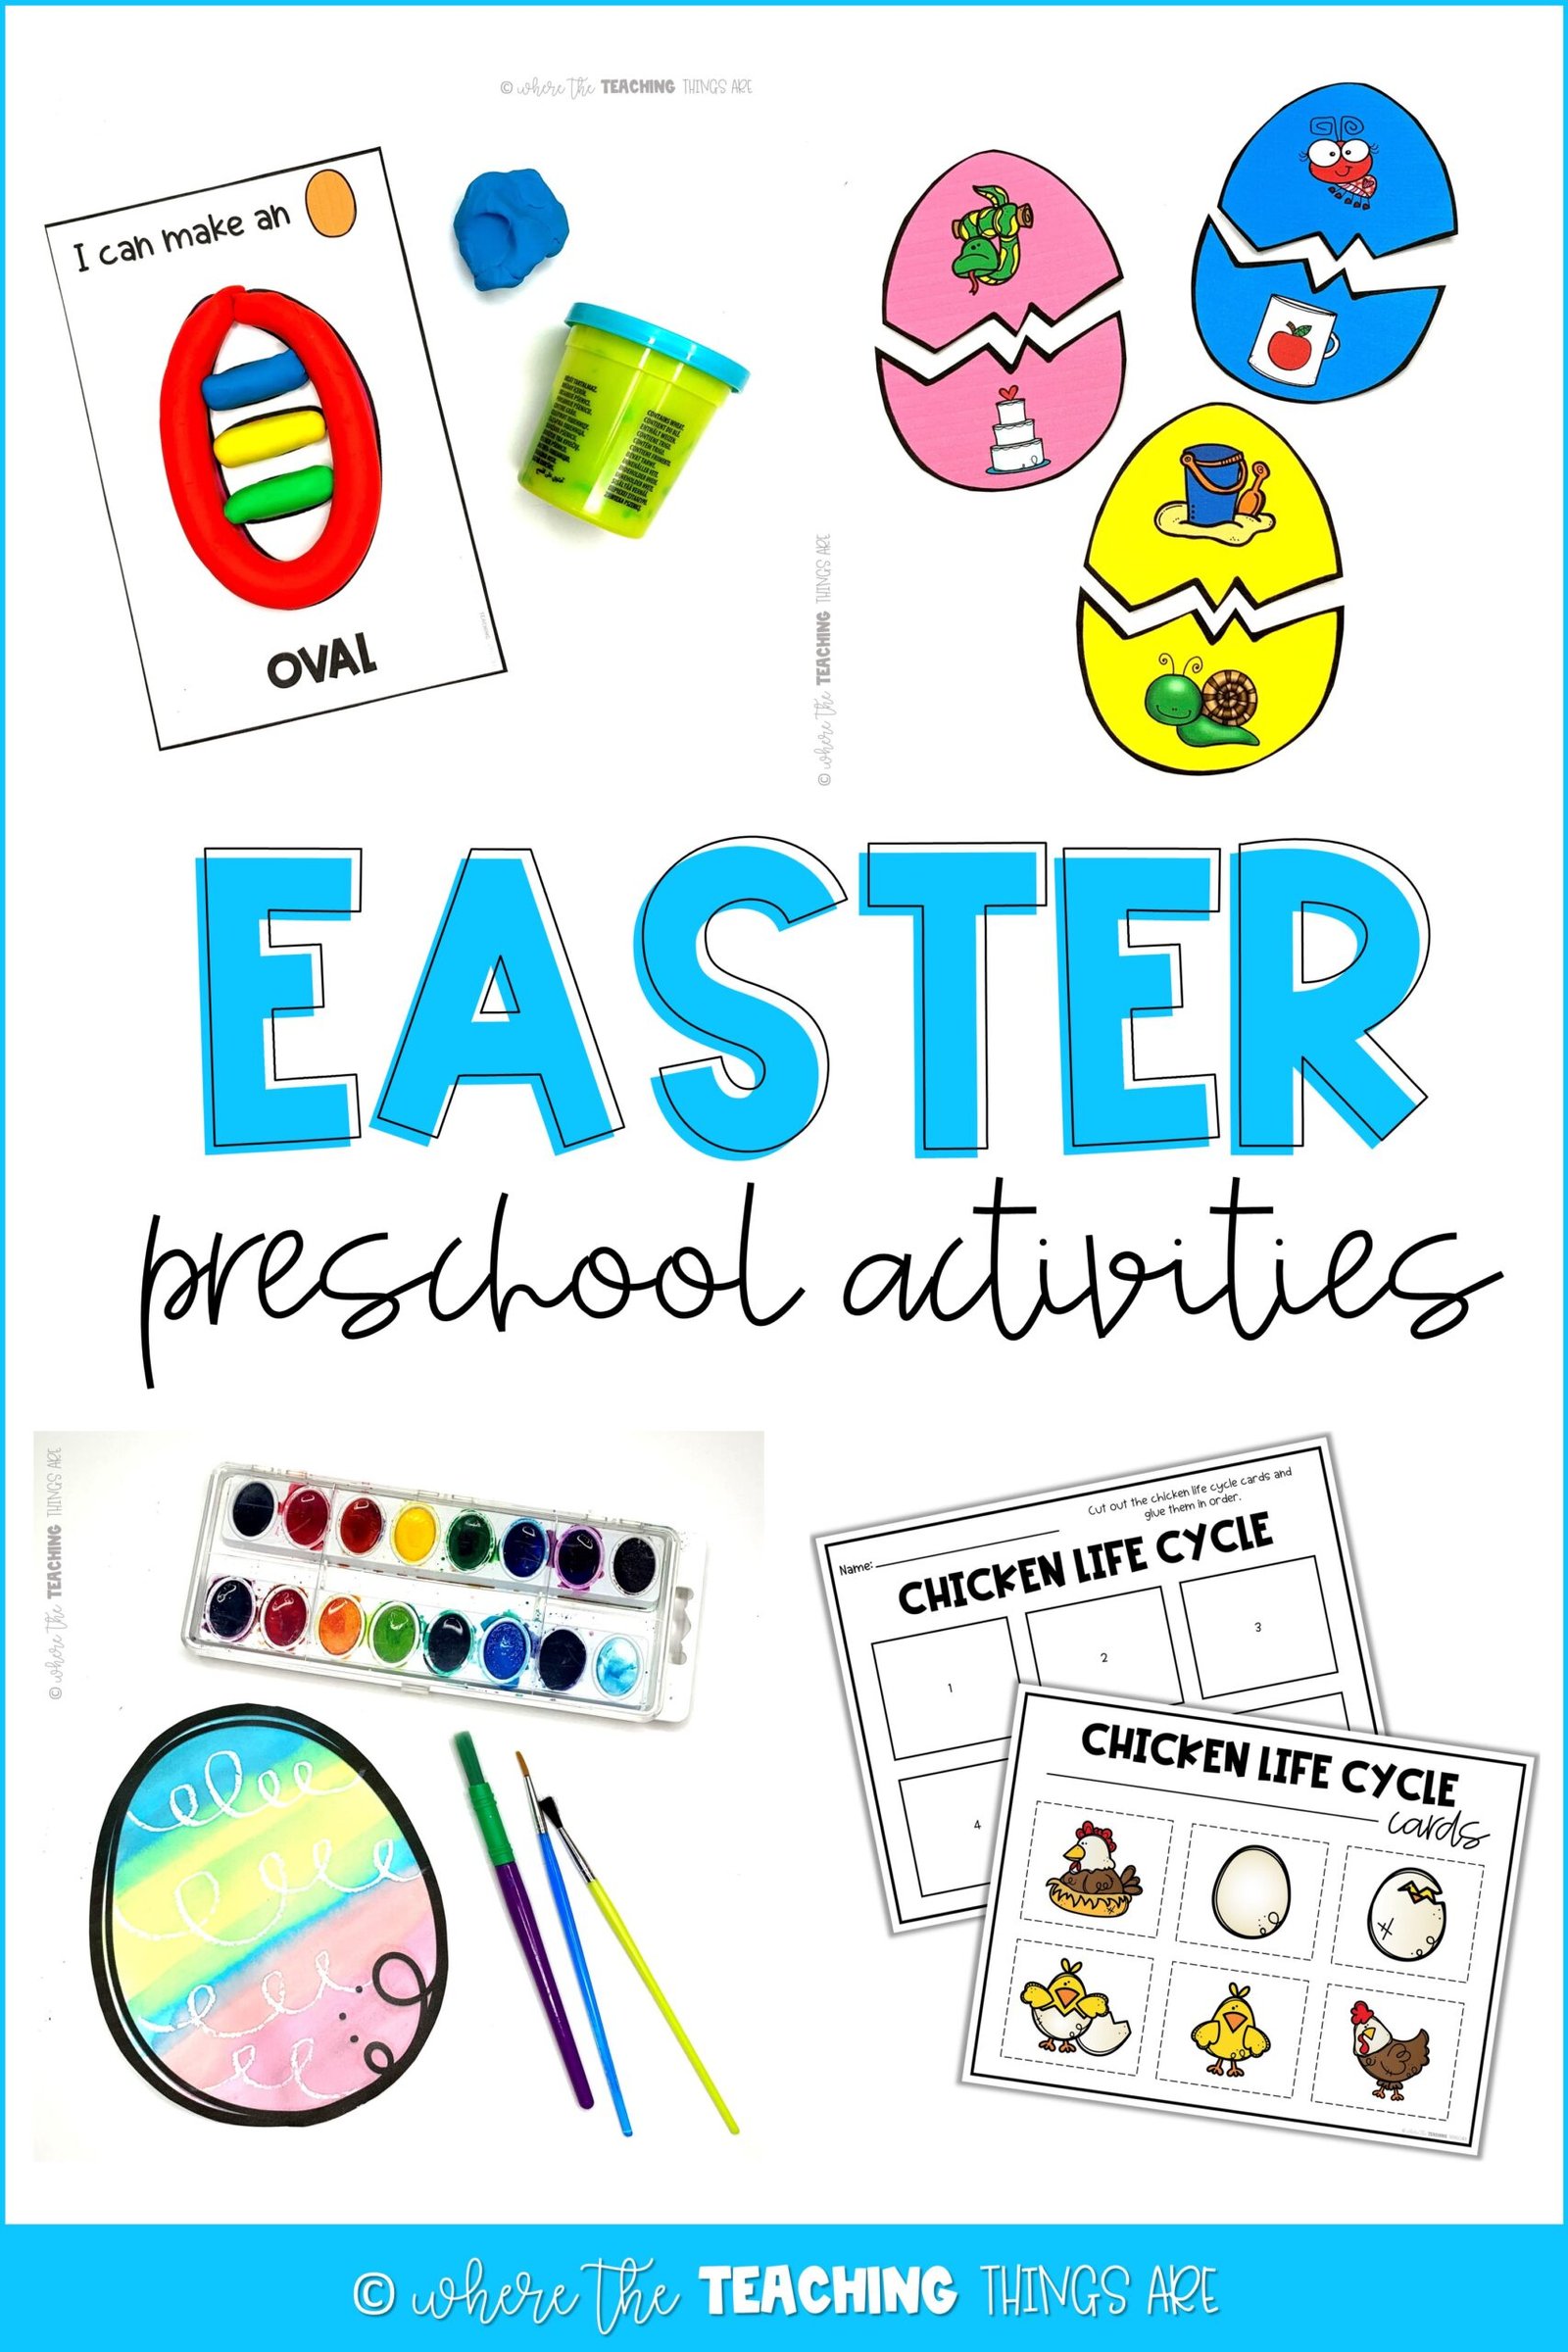 Exciting Easter Activities!